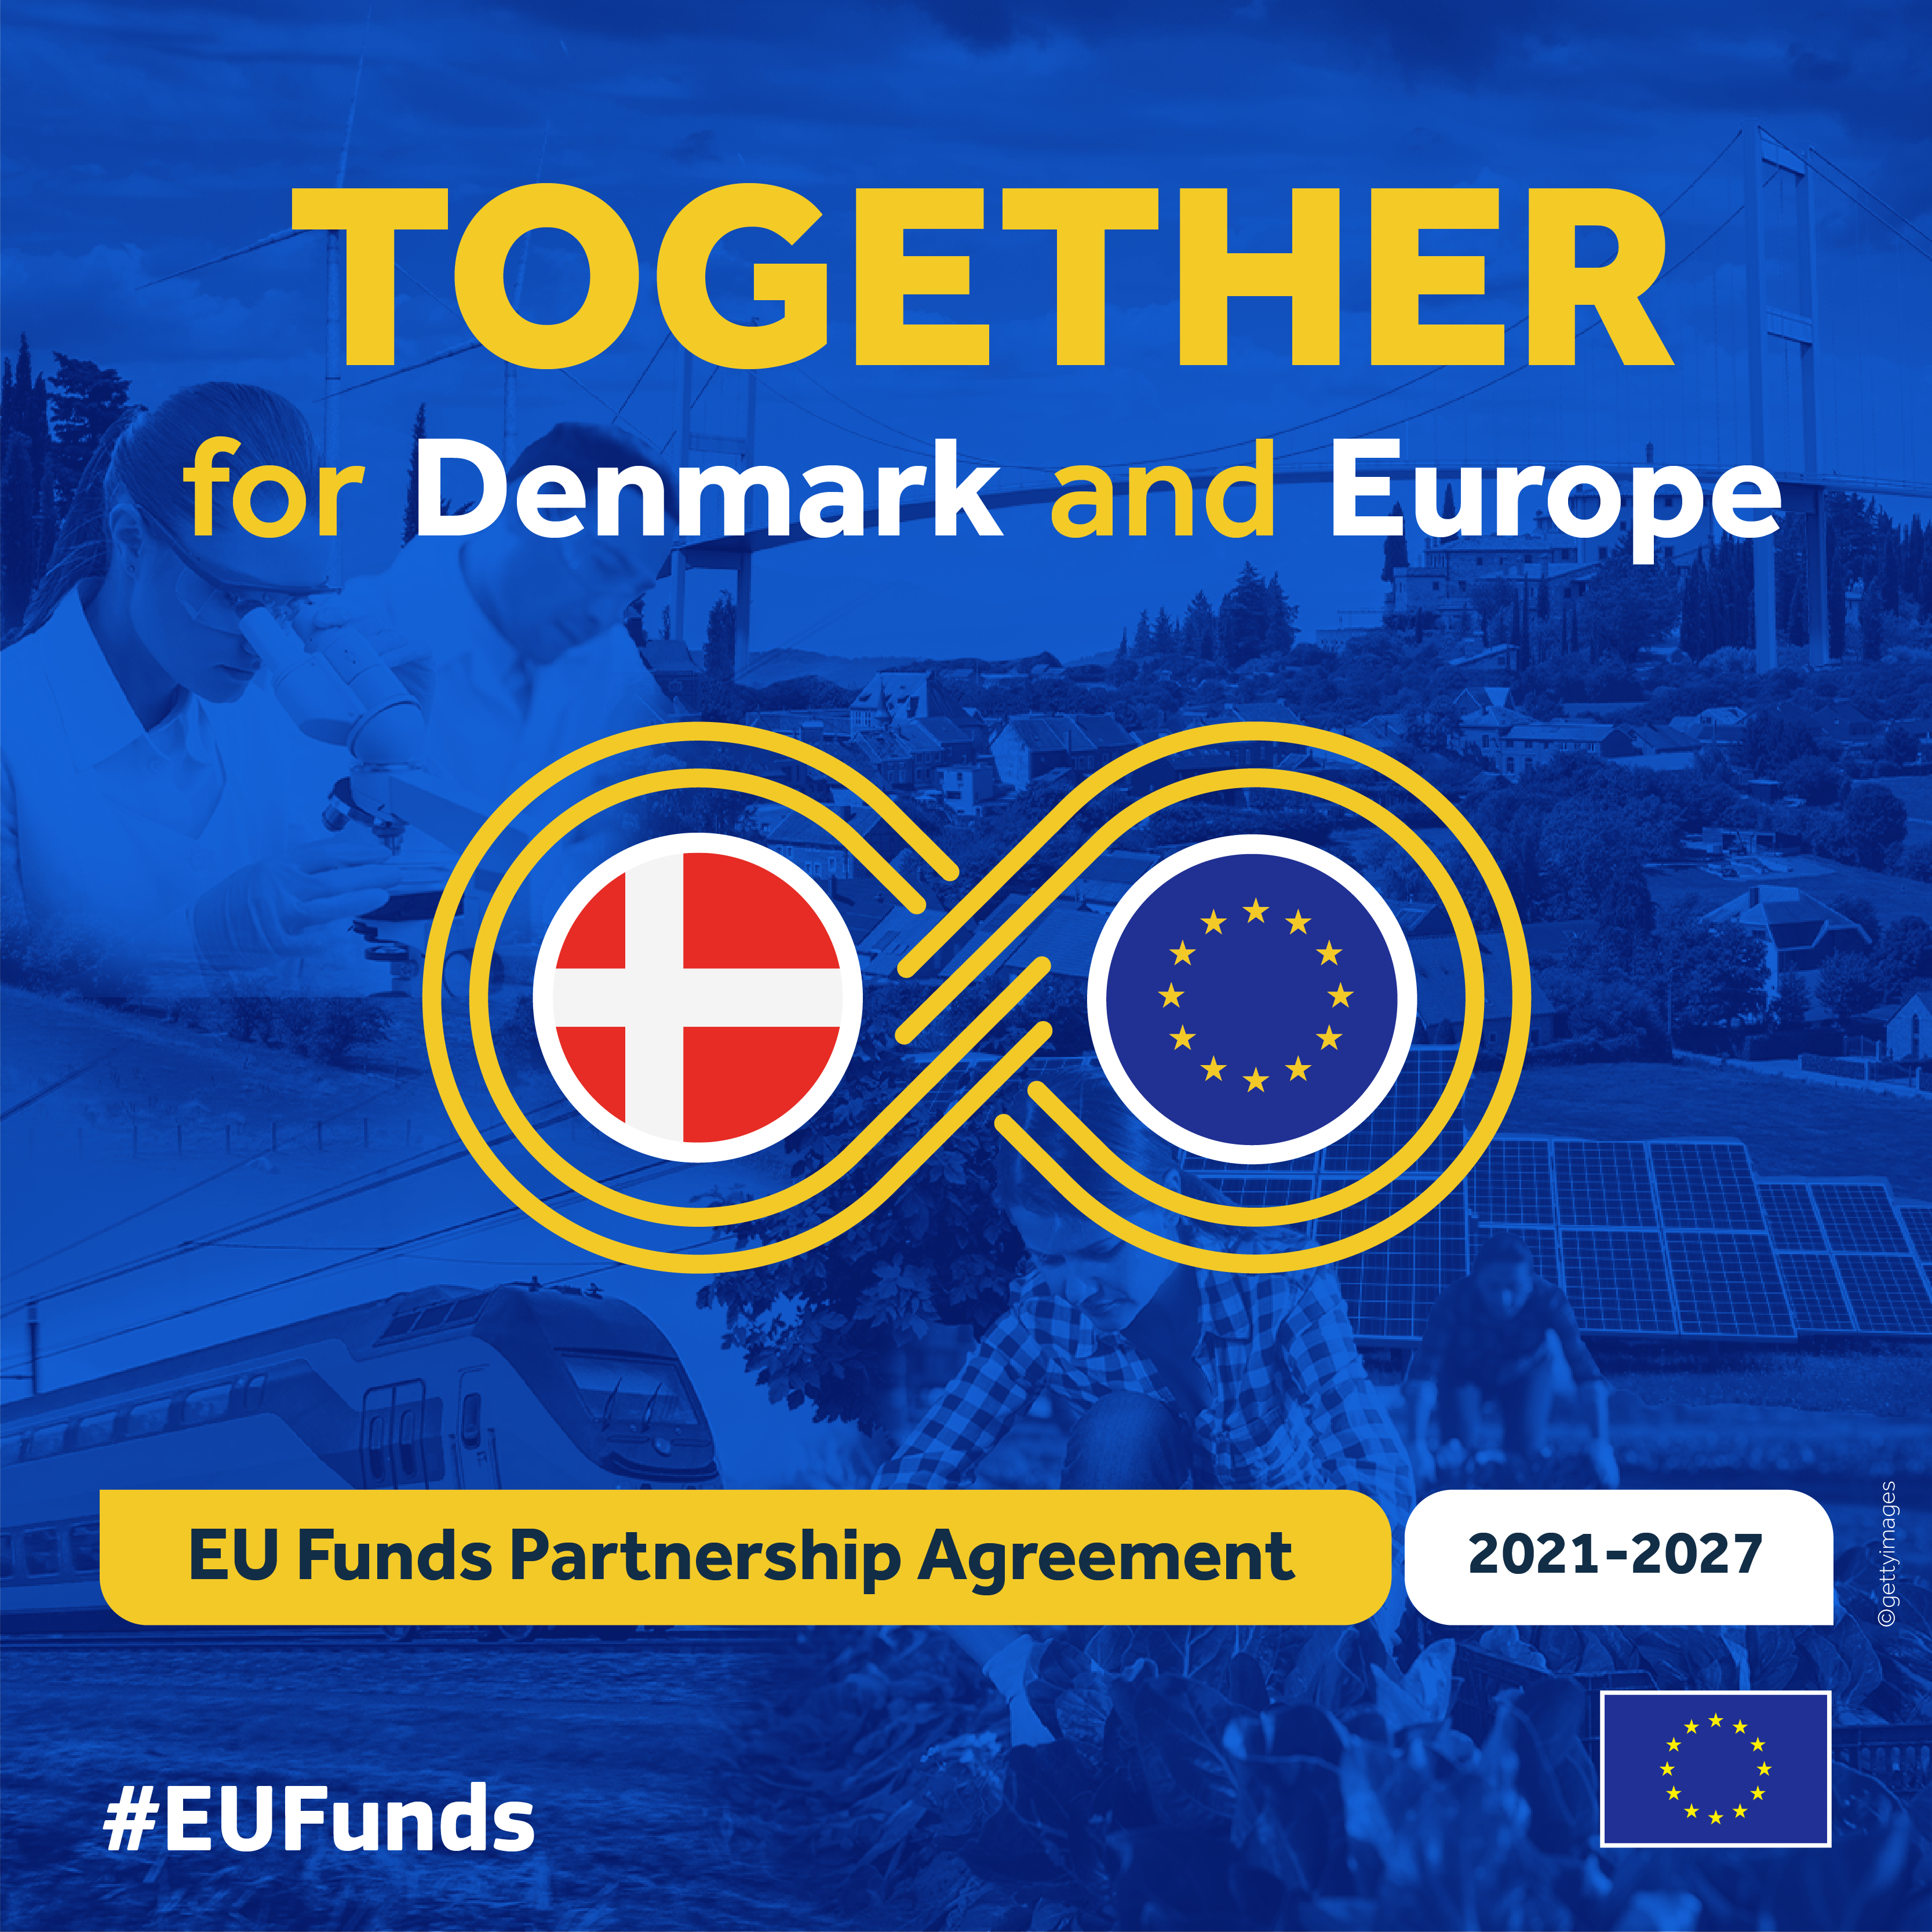 EU cohesion policy: Commission adopts €808 million Partnership Agreement with Denmark for 2021-2027